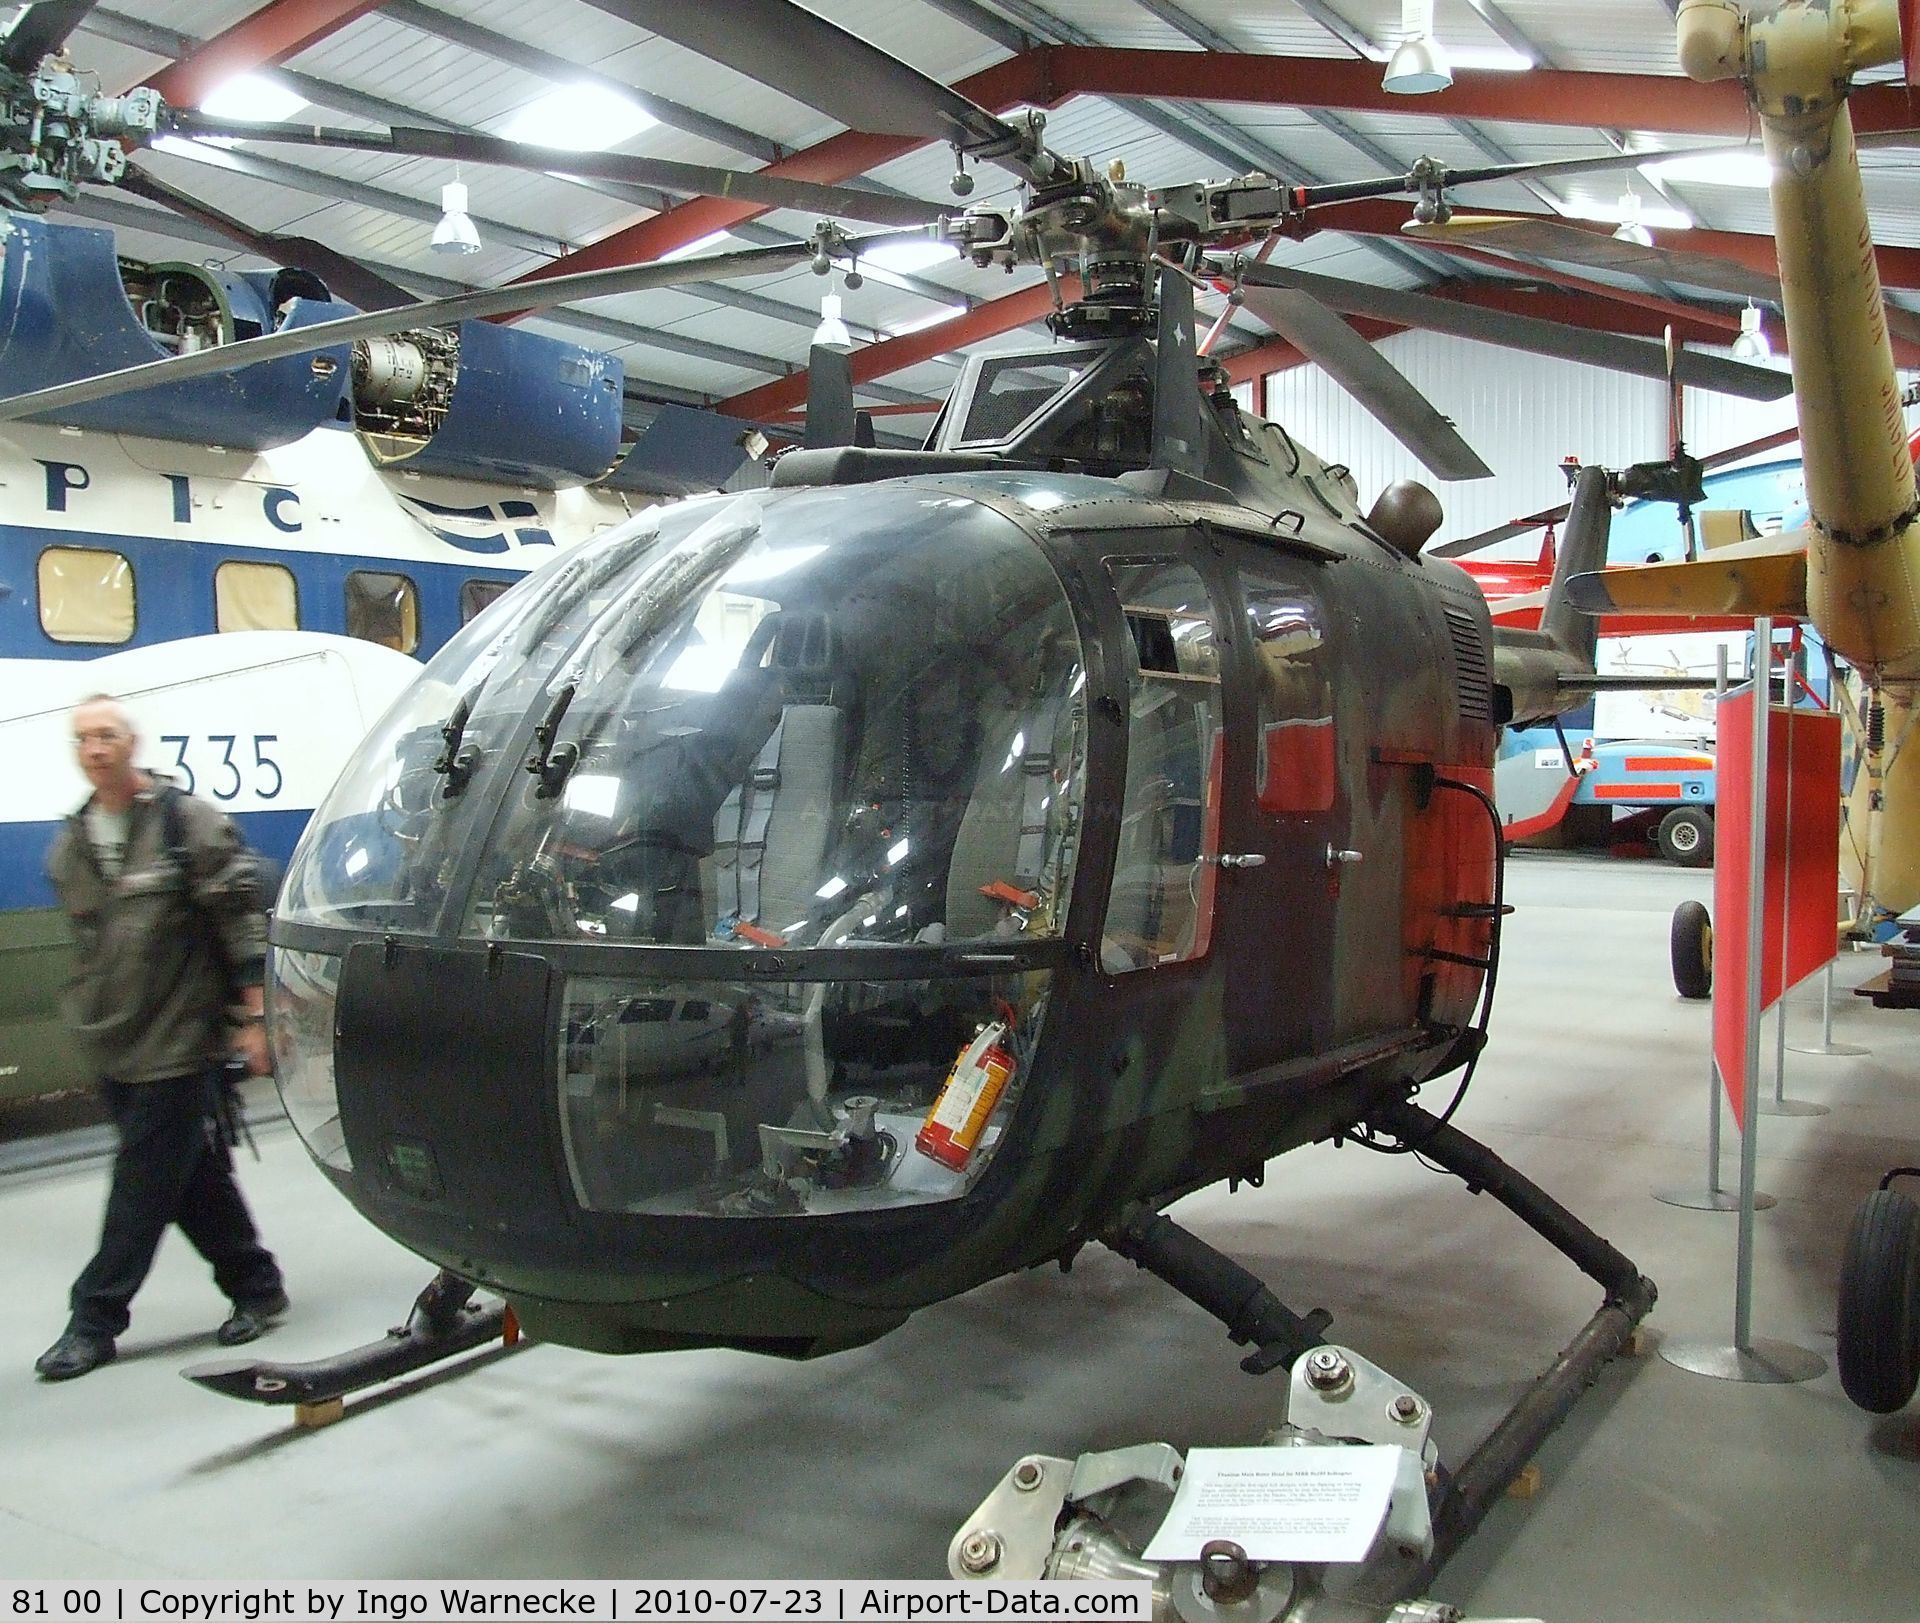 81 00, 1984 MBB Bo.105M C/N 5100, MBB Bo 105M at the Helicopter Museum, Weston-super-Mare